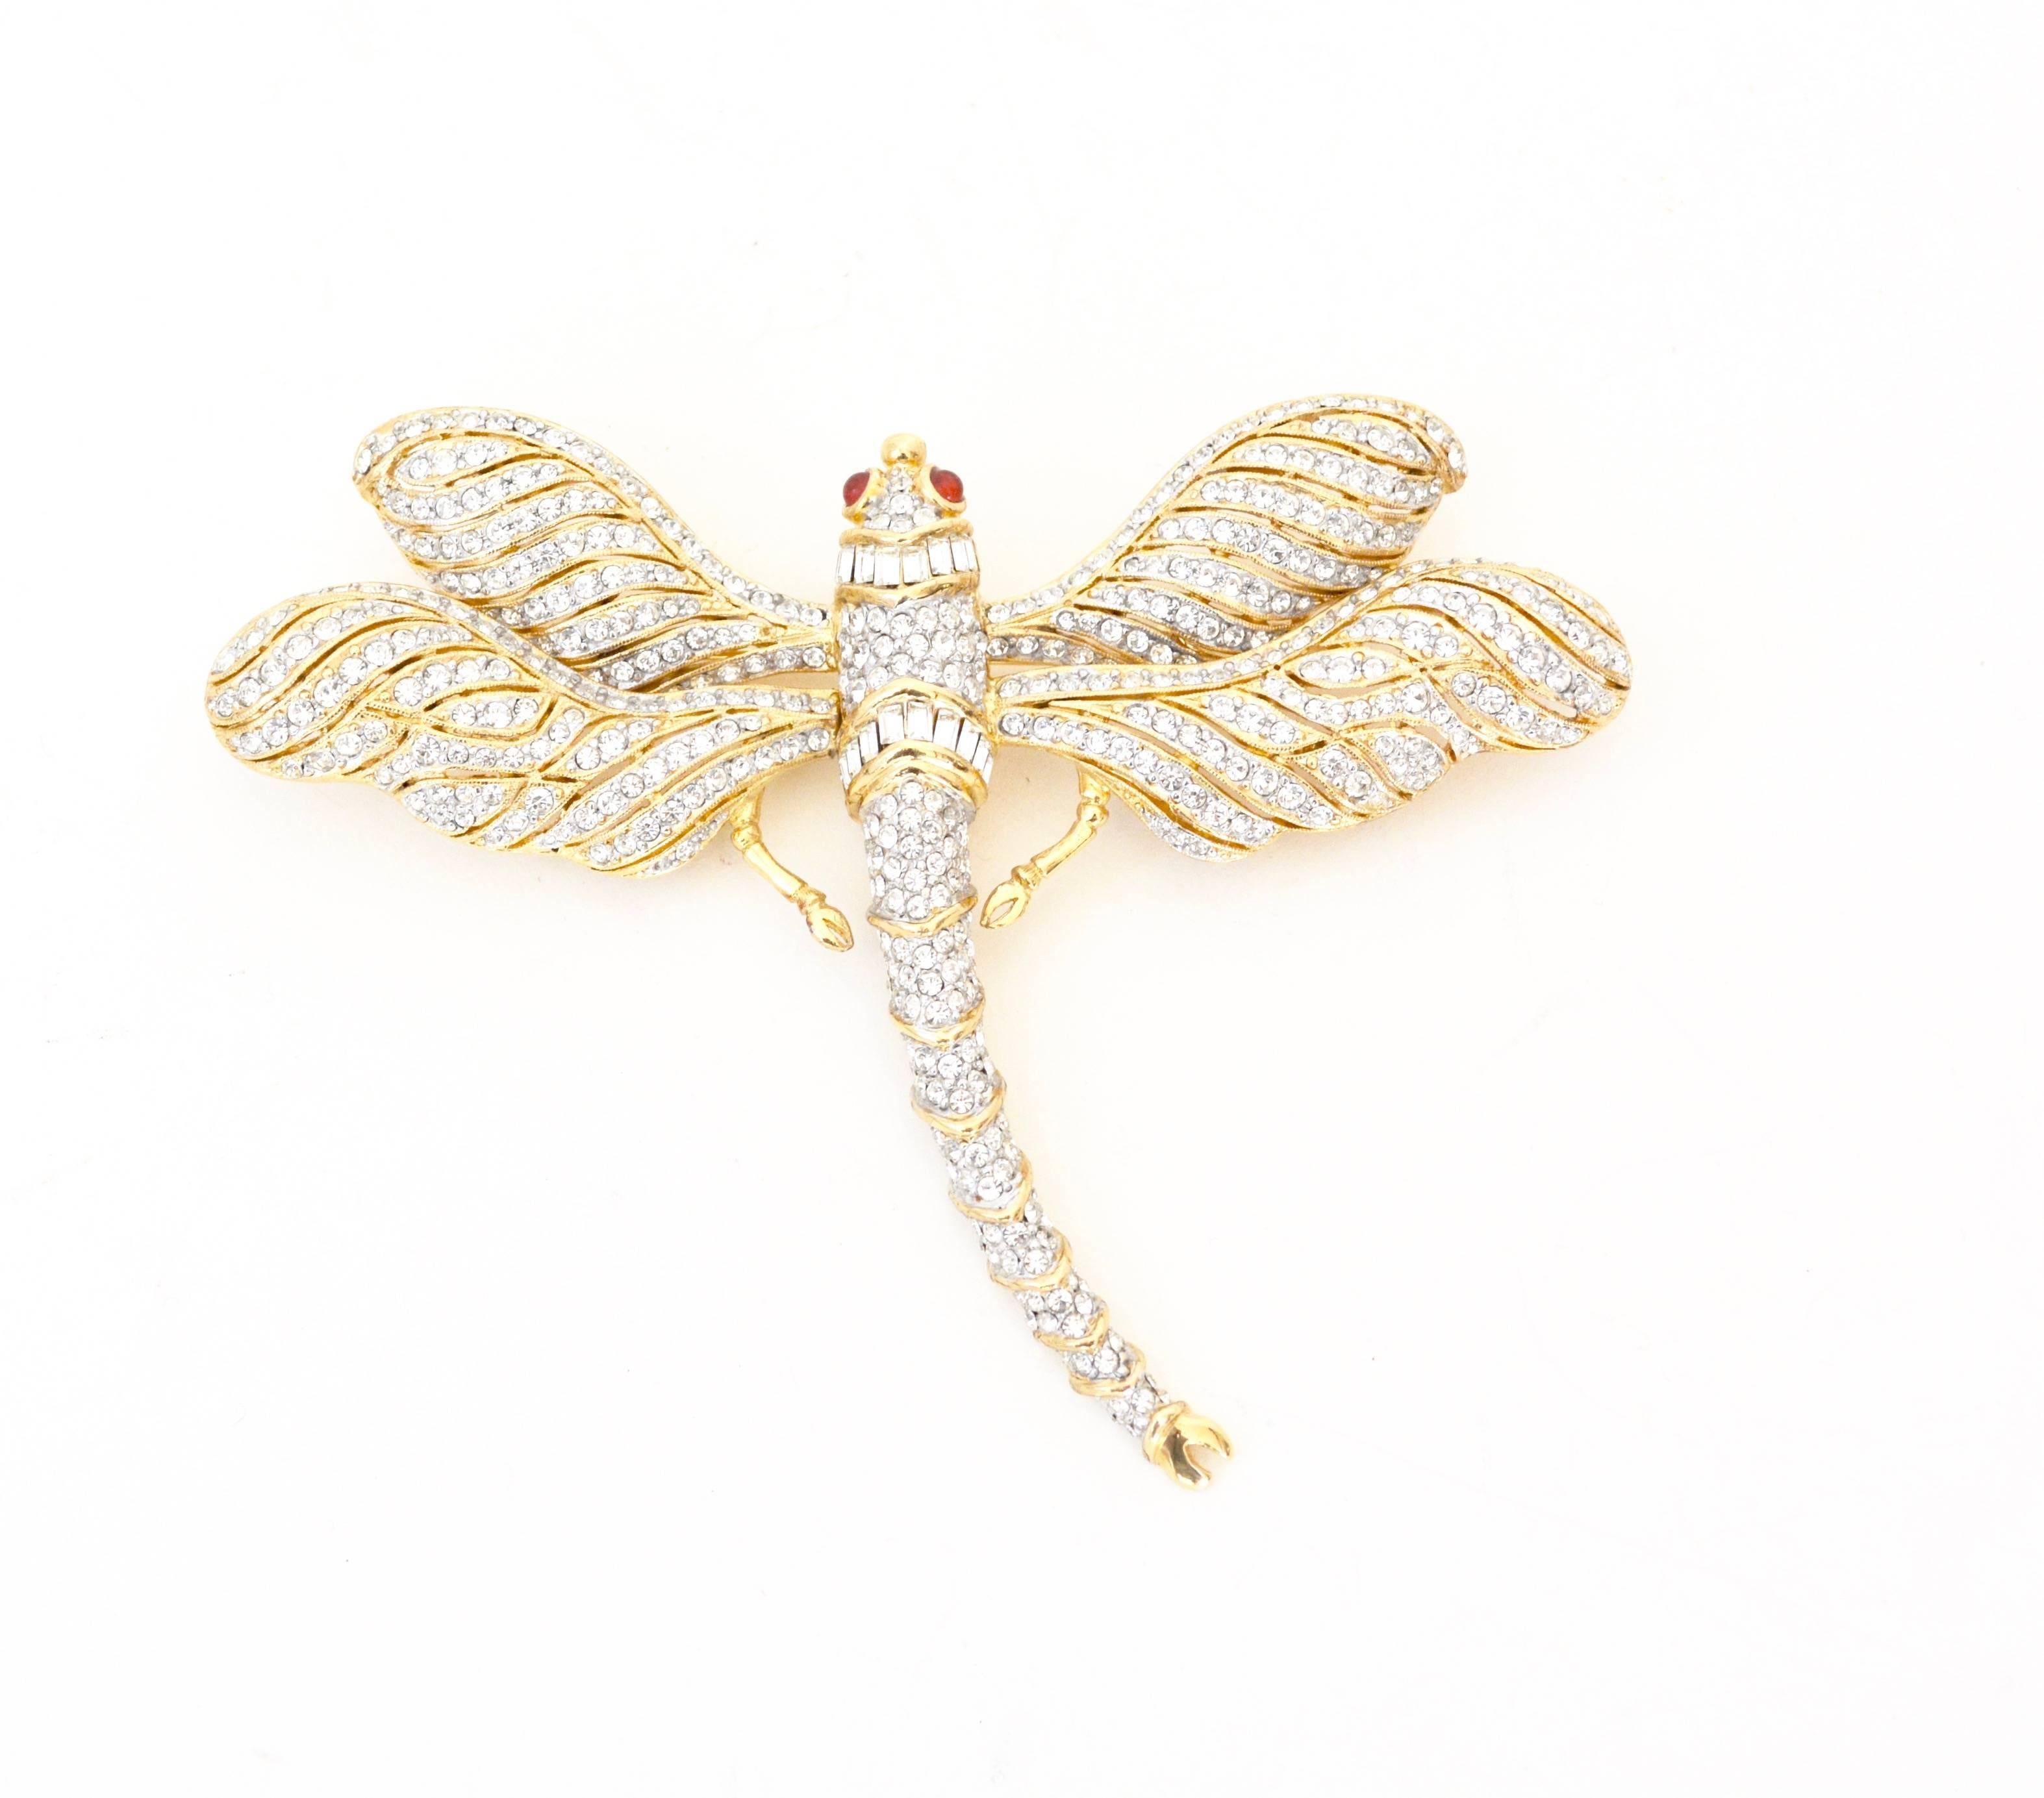 Fun large circa 1980s-1990s gilt rhinestone dragonfly signed Ciner. Features red glass cabochon eyes.  About 4" x 4.5" wide. Condition is excellent. Considering offers. 